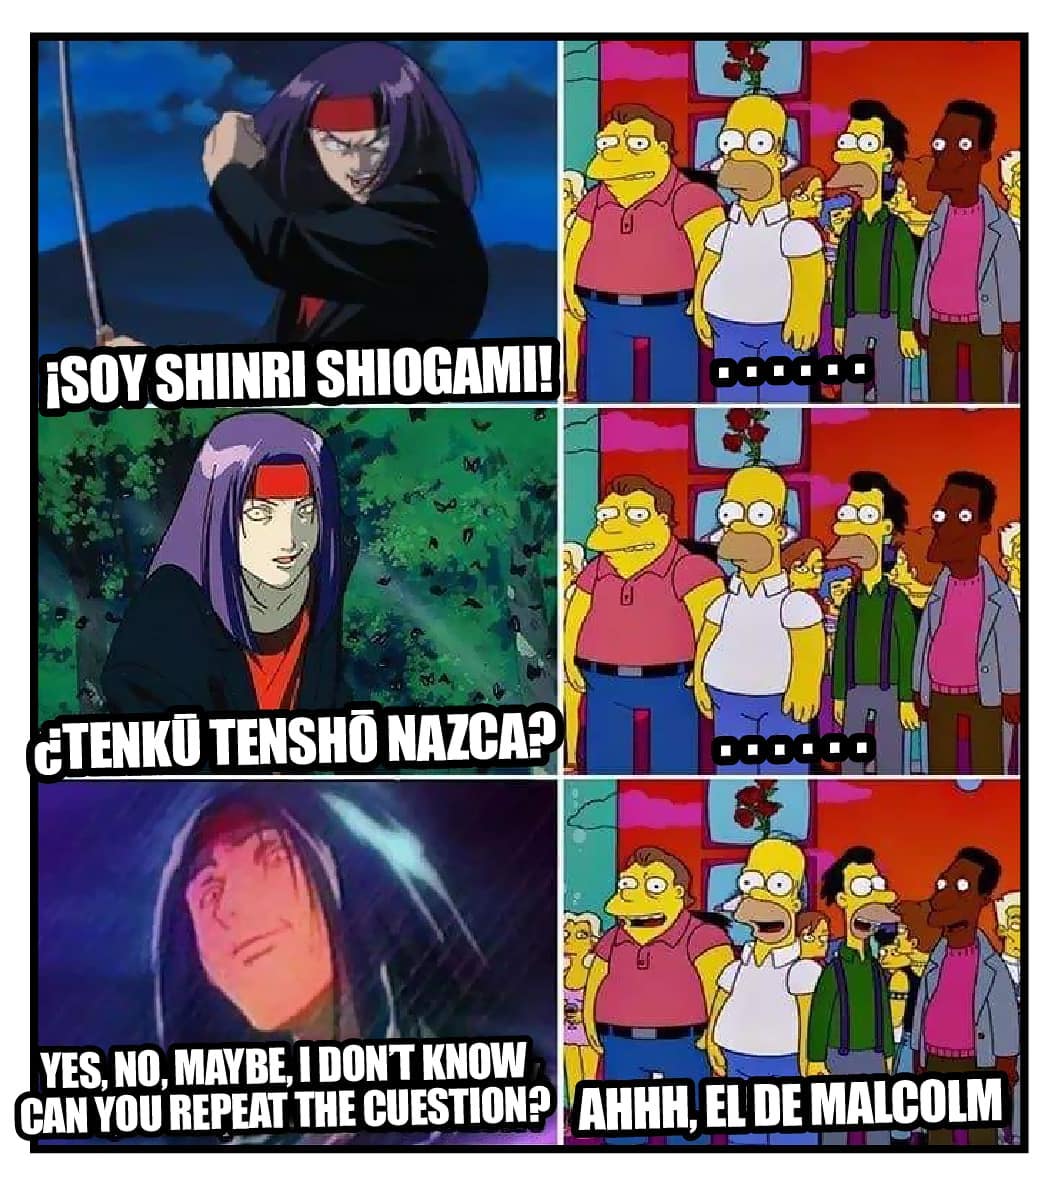 ¡Soy Shinri Shiogami!  ¿Tenko tensho nazca?  Yes, no maybe, i don't know can you repeat the cuestion?  Ahhh, el de malcolm.